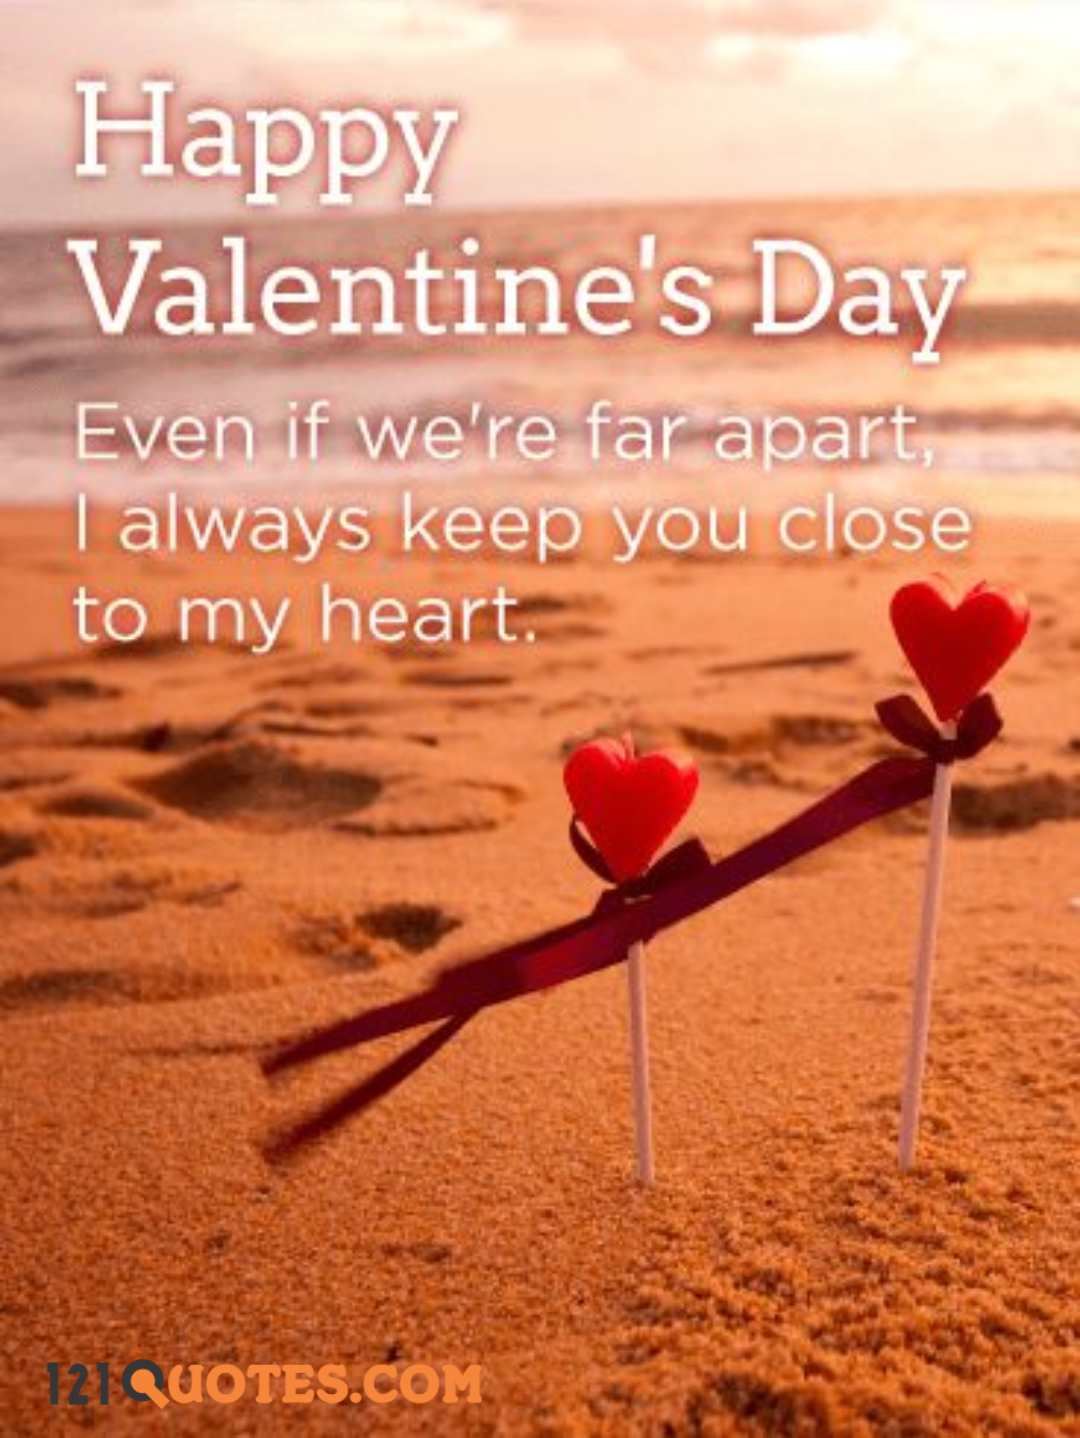 valentines day images free download